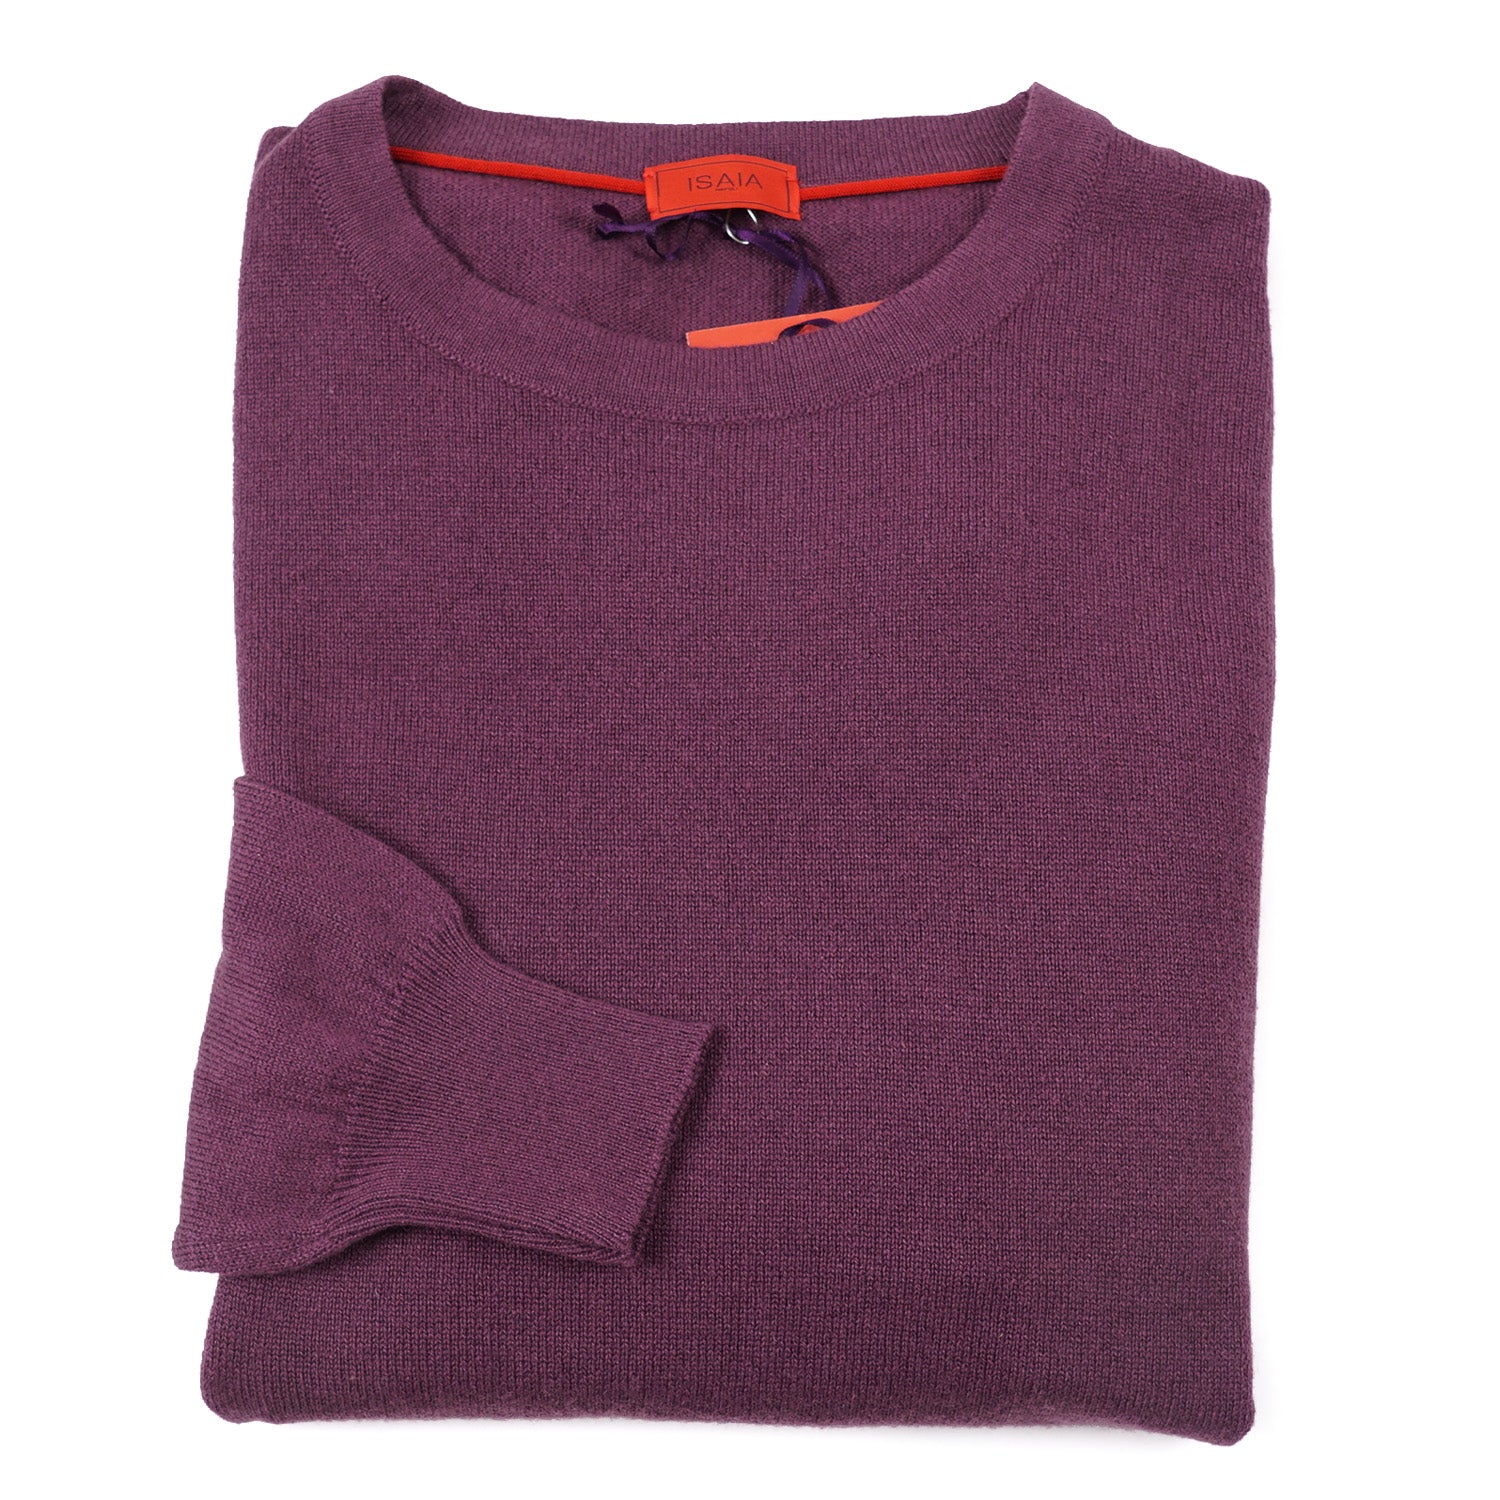 Isaia Slim-Fit Cashmere Sweater with Suede Elbow Patches - Top Shelf Apparel